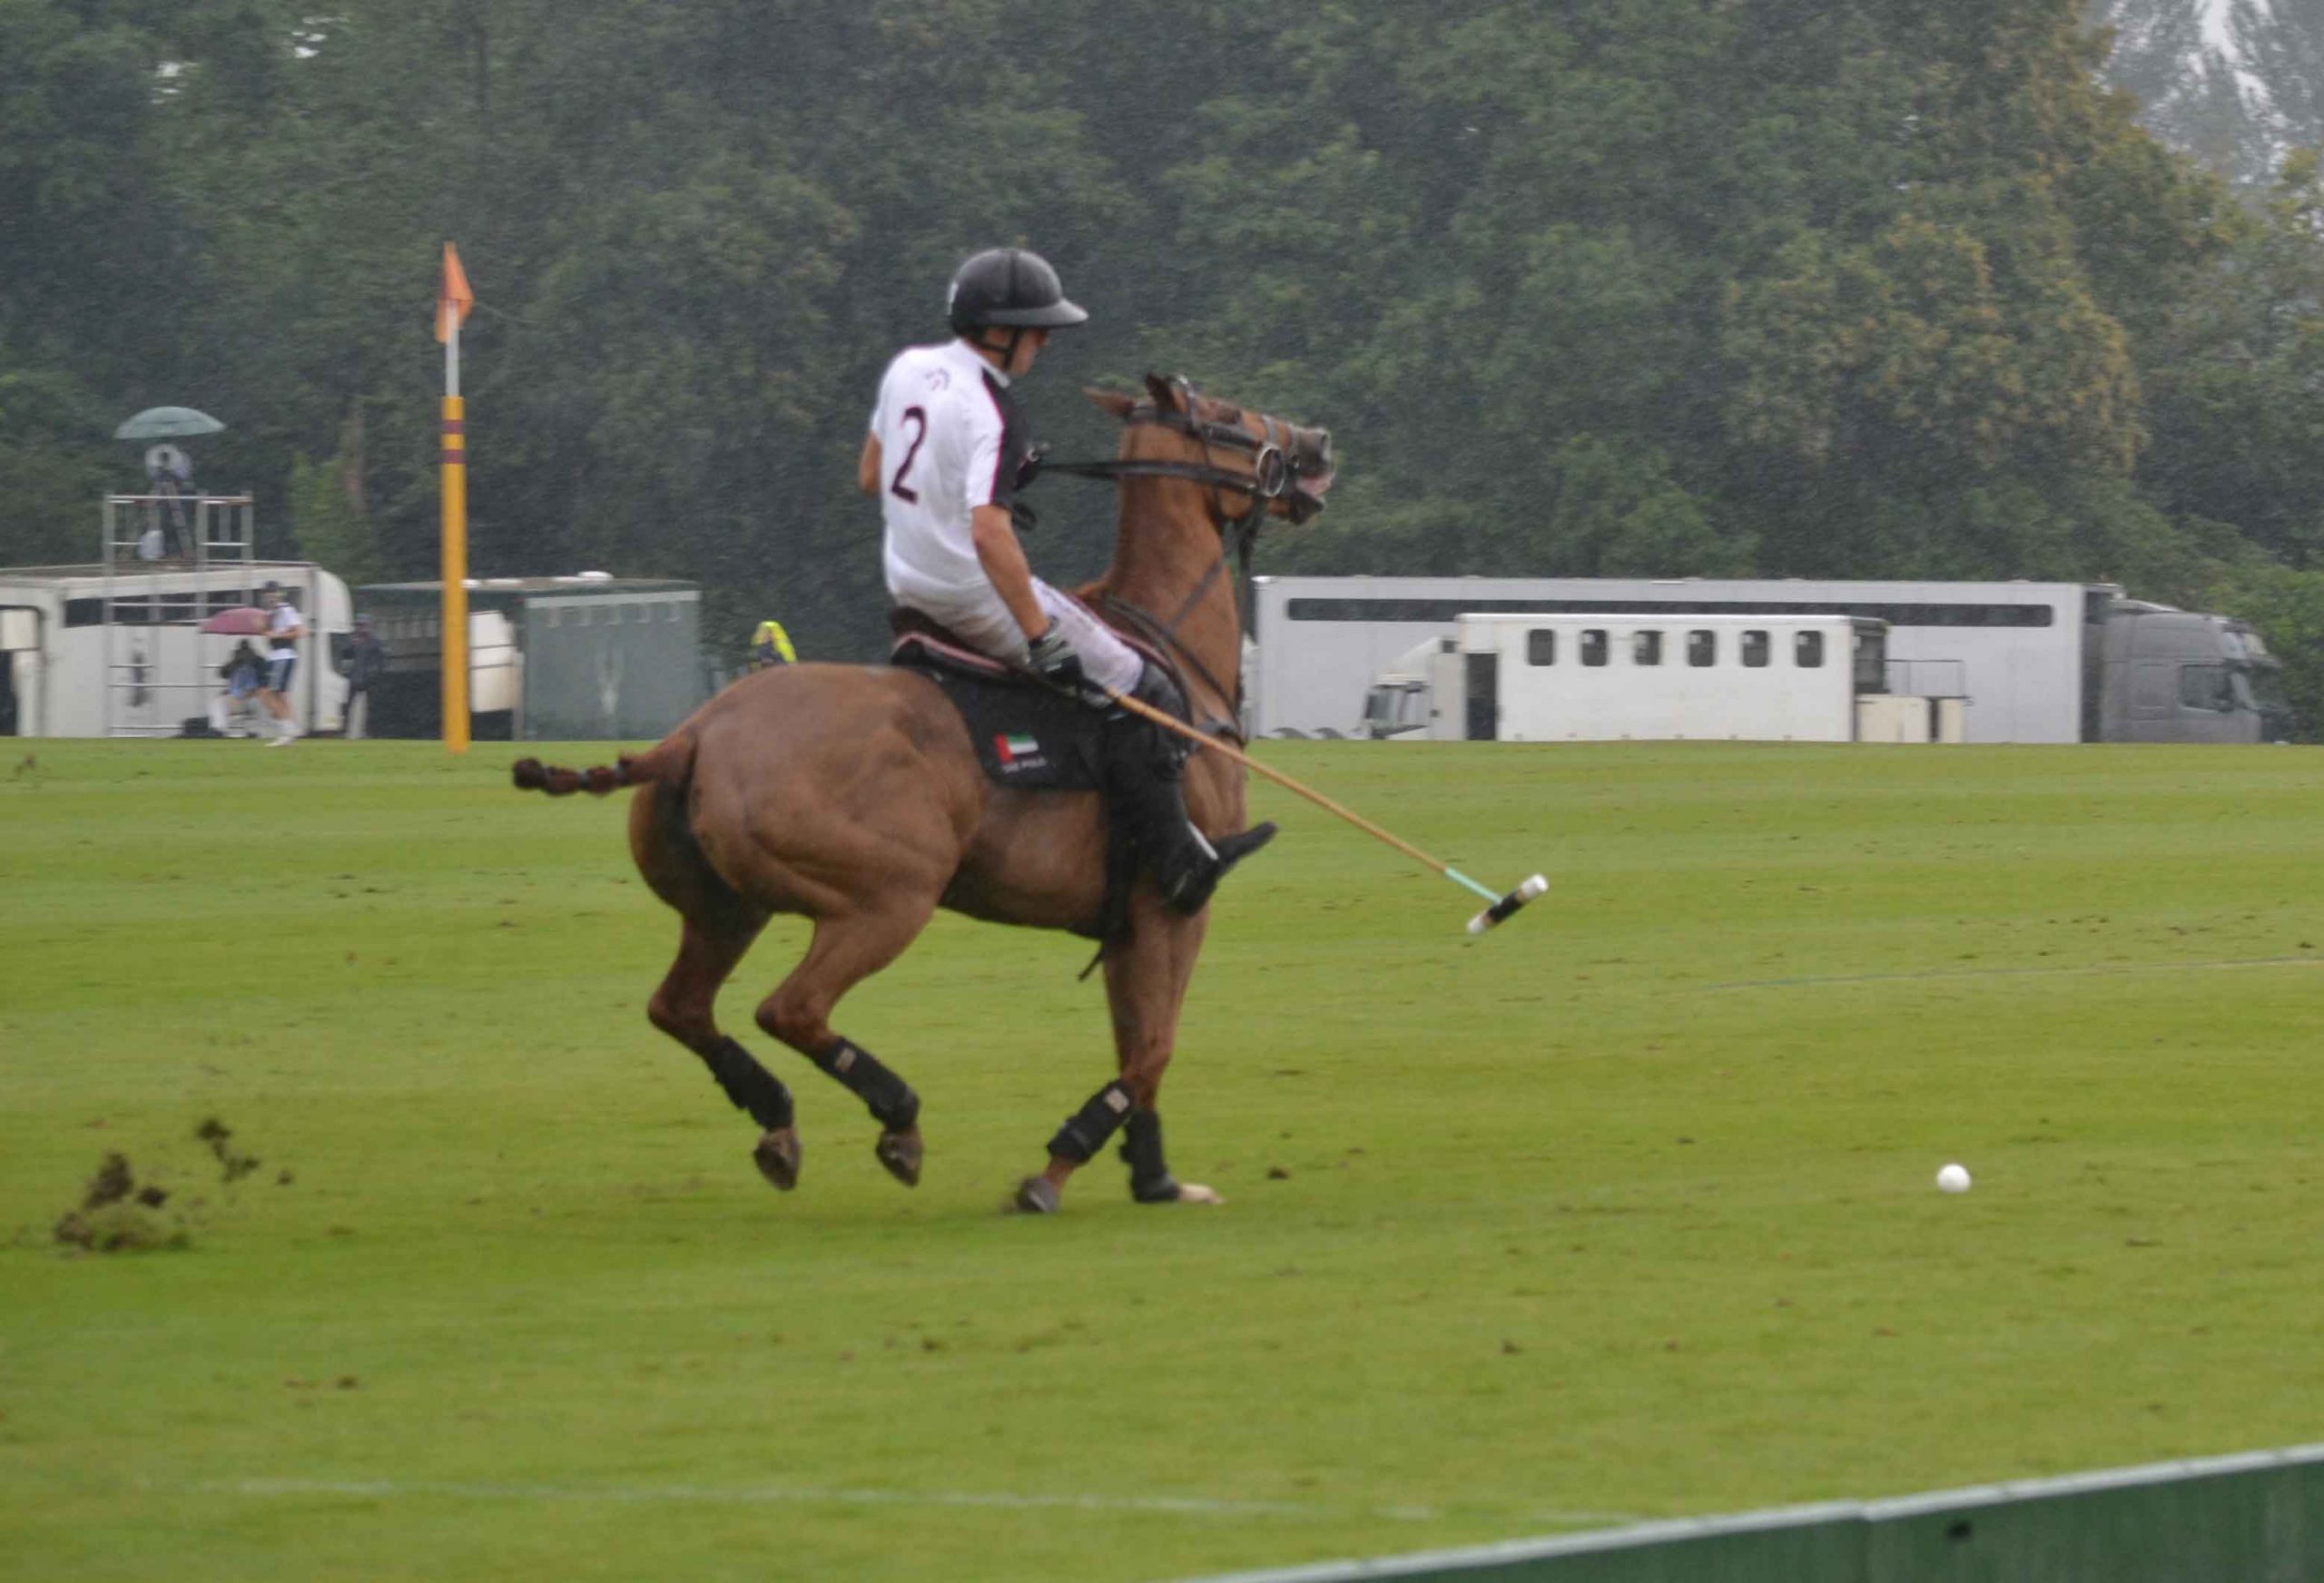 Cowdray Gold Cup Polo